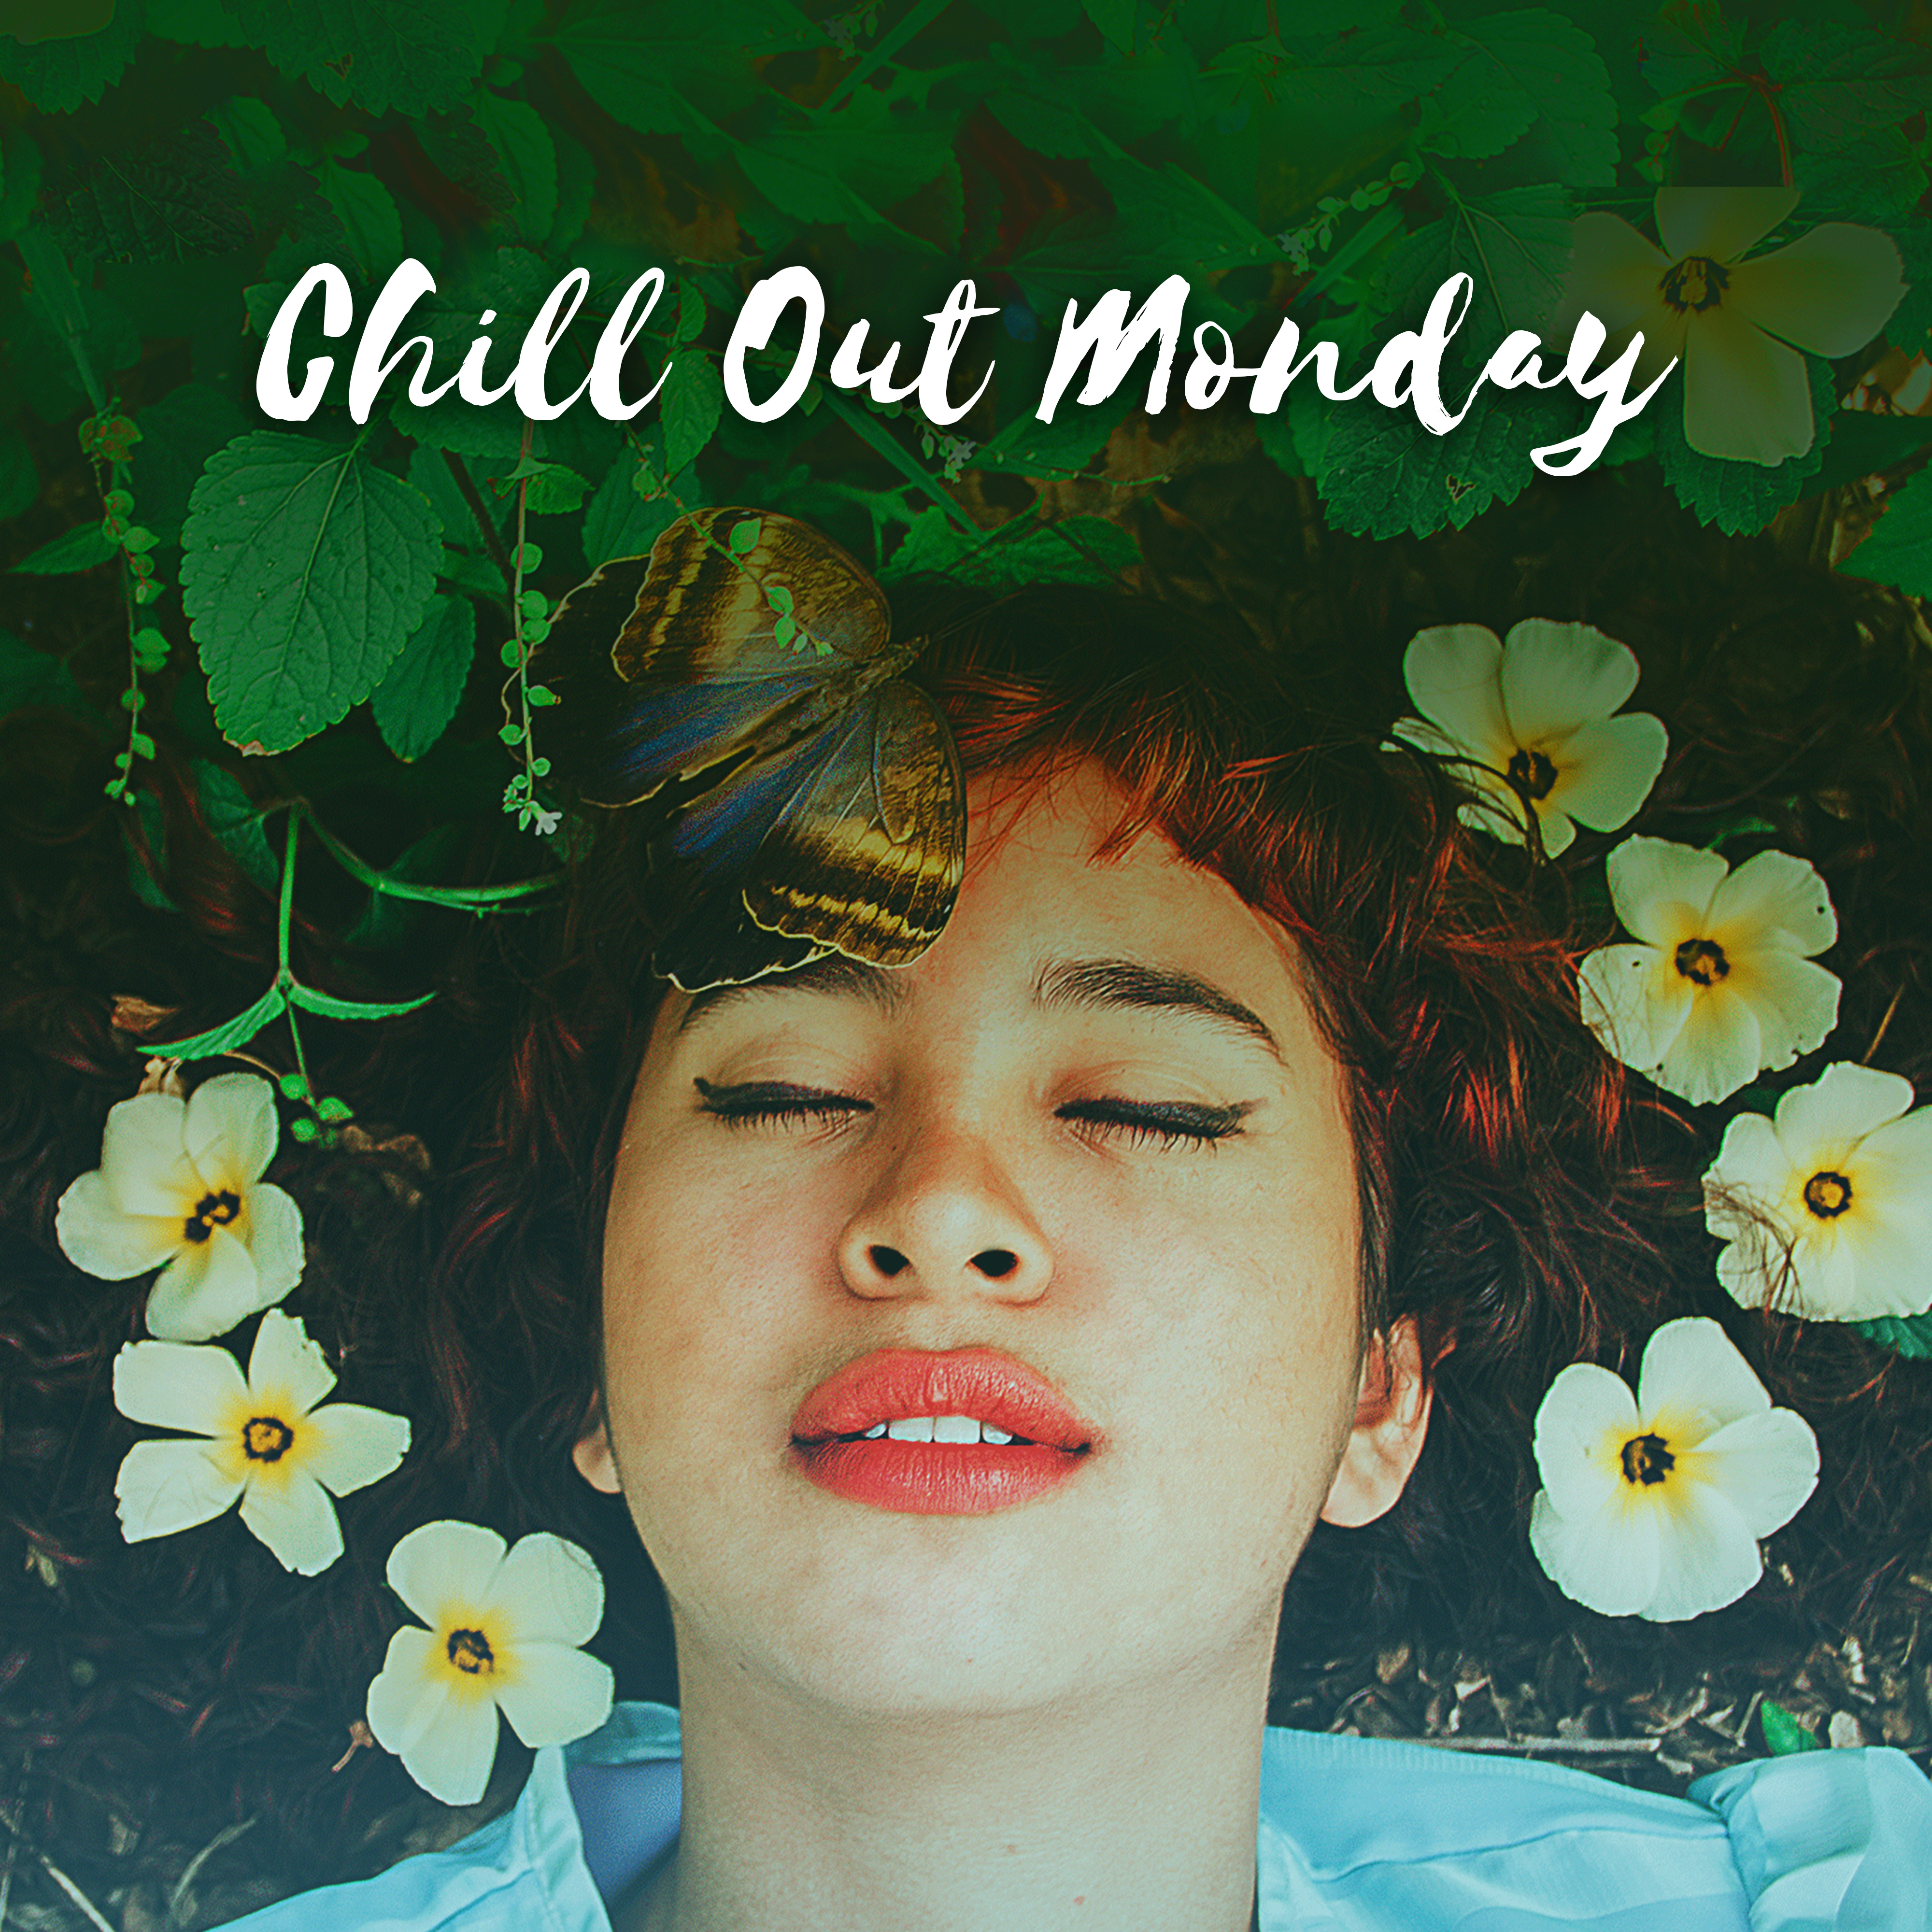 Chill Out on the Monday  Wake Up, Chill Out Music, Summer Lounge, Relax, Morning Chill